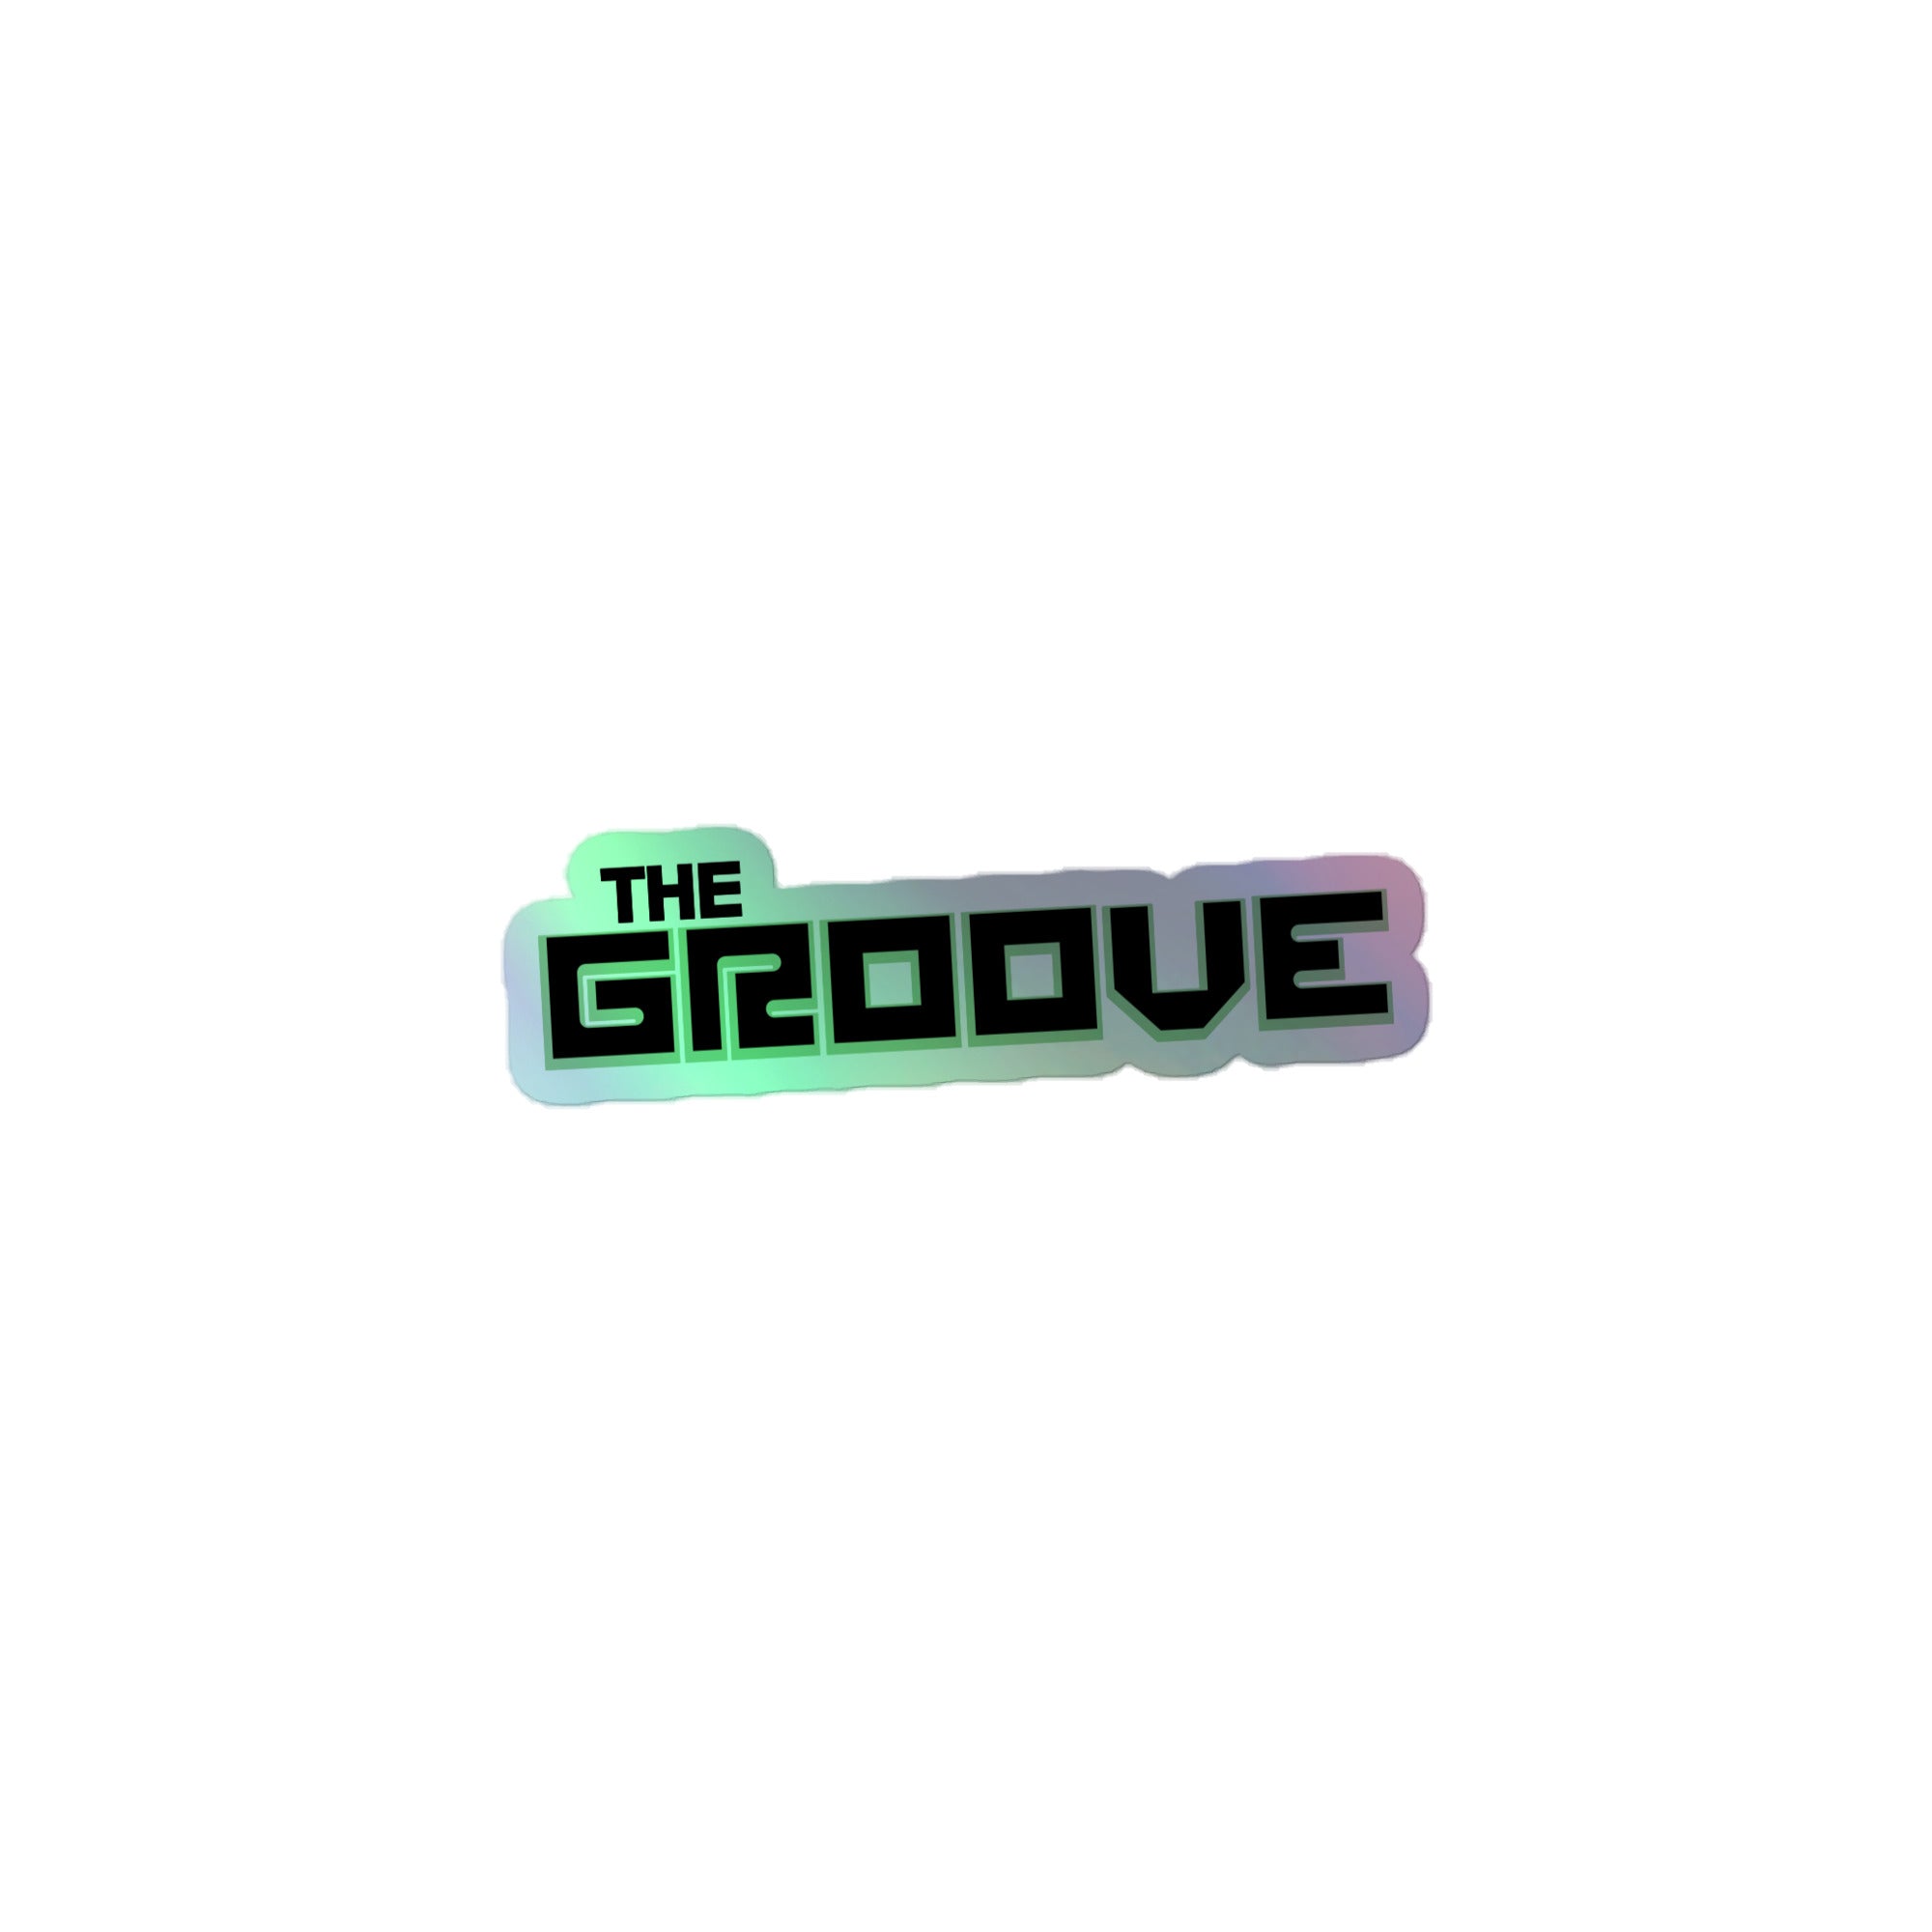 The Groove: Holographic Sticker